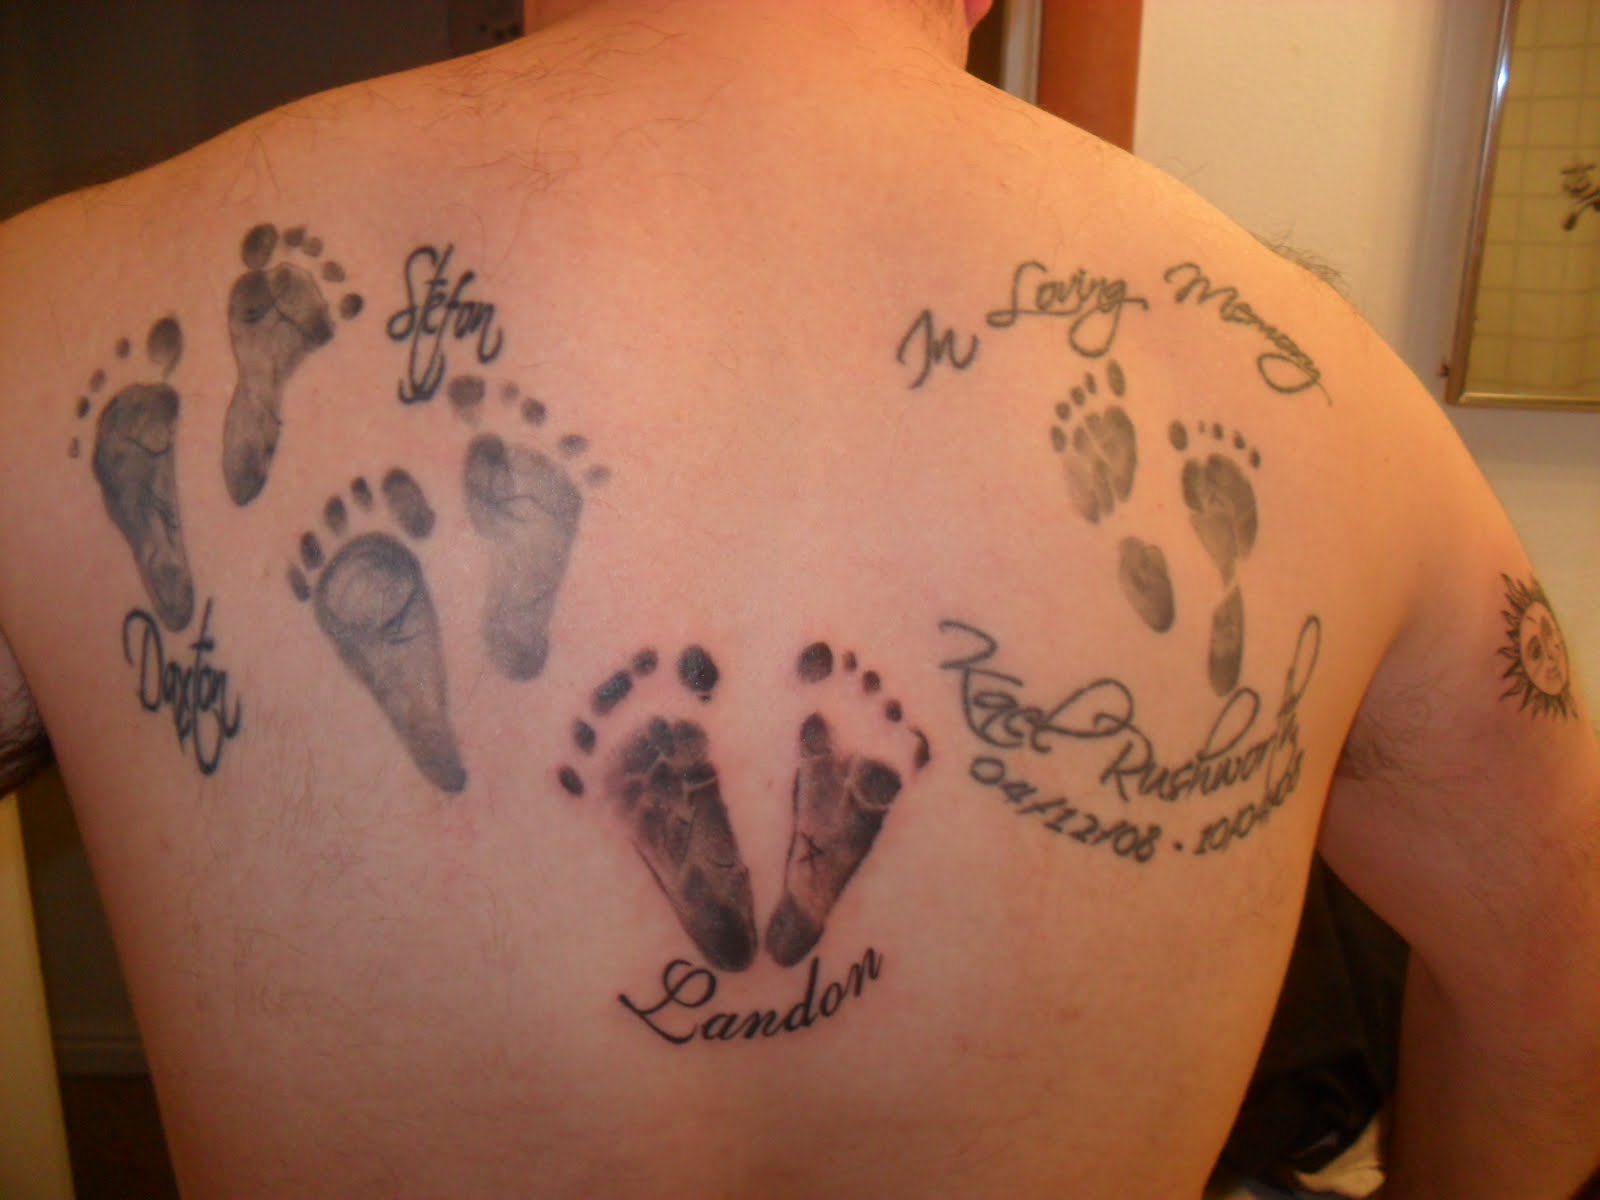 Memorial Tattoos Designs, Ideas and Meaning | Tattoos For You